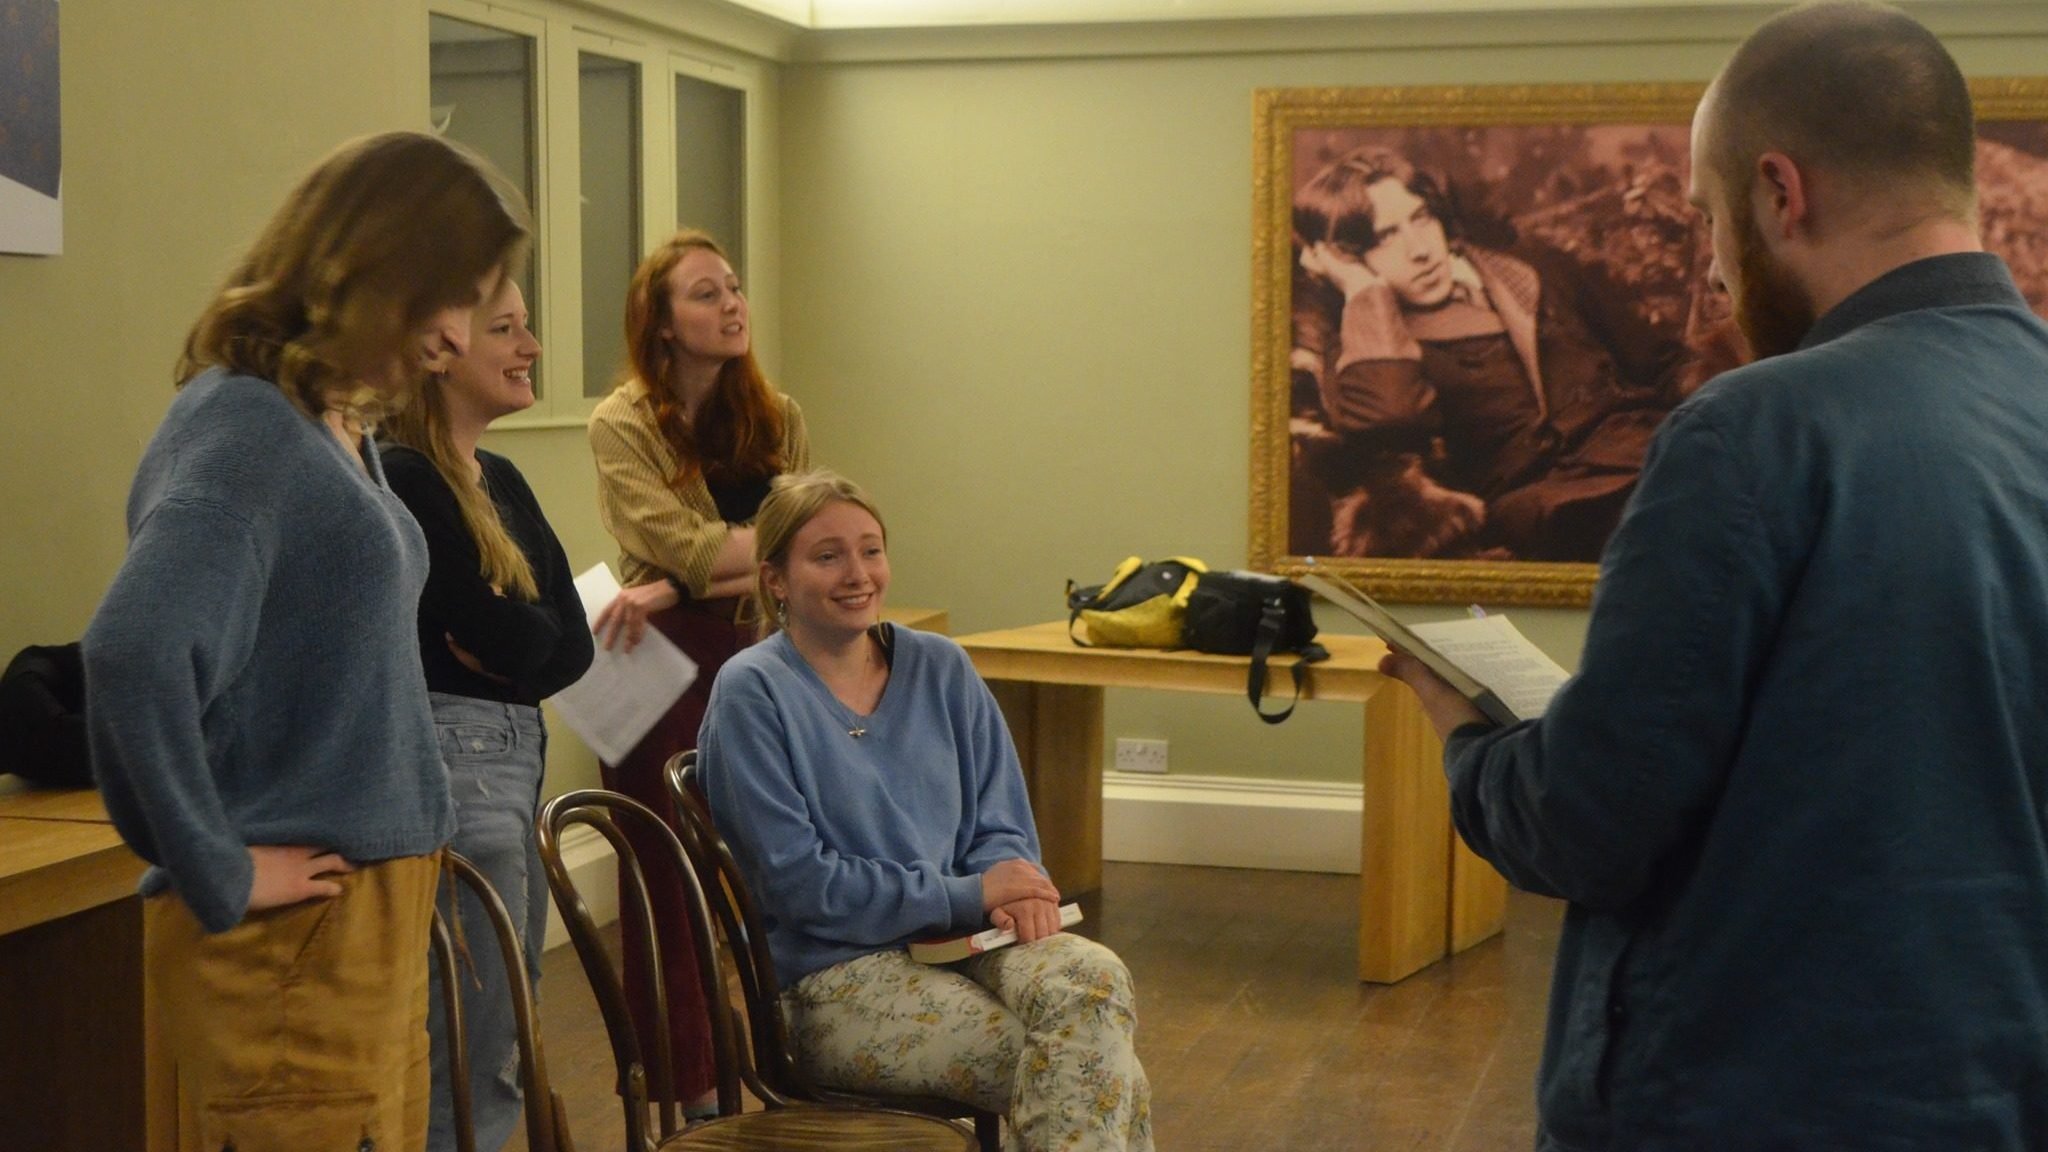 A group of four young women and a young man rehearsing a scene from a play. There is a picture of Oscar Wilde on a wall in the background